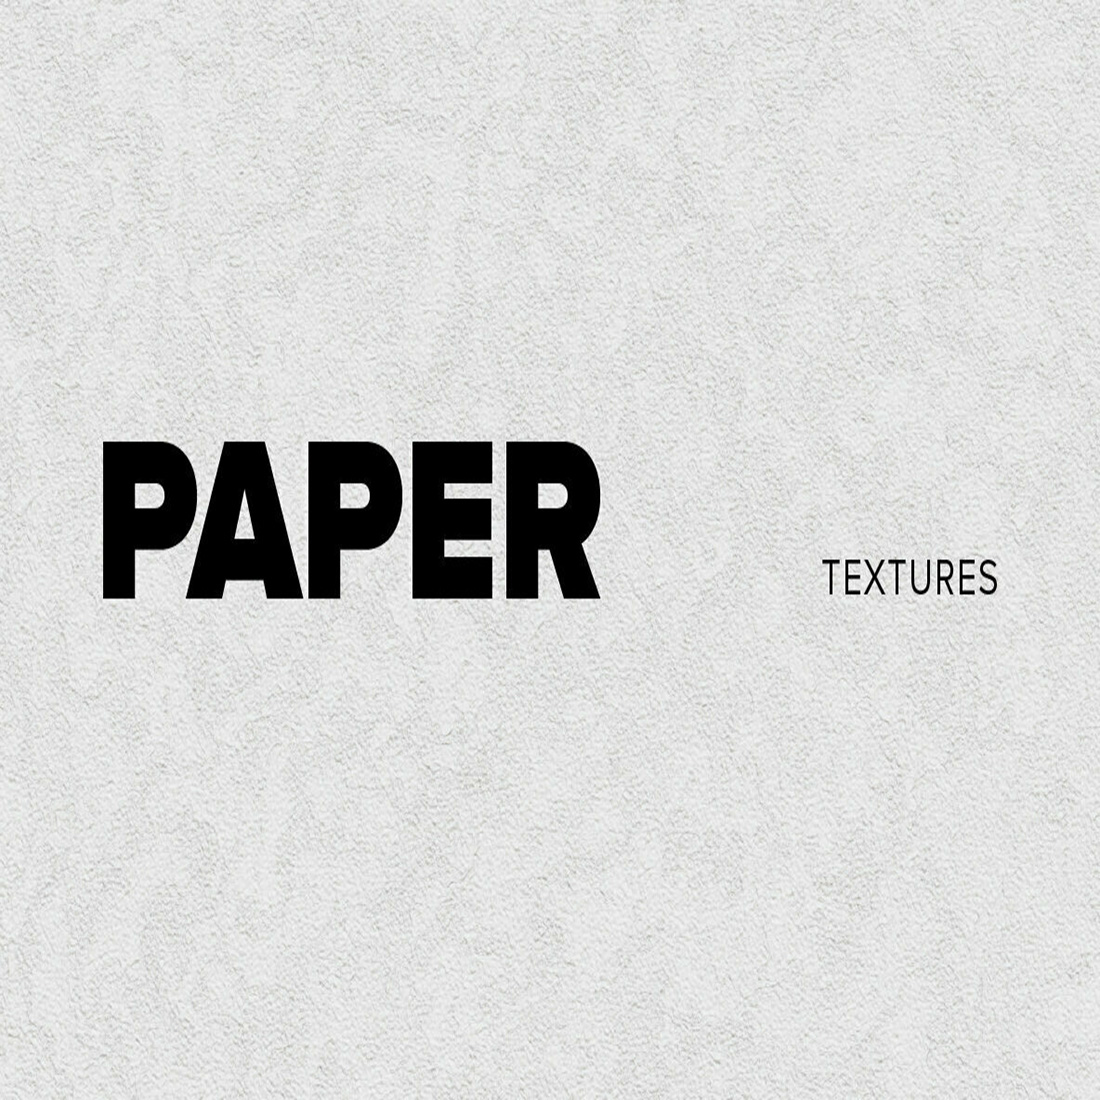 70 Paper Textures cover image.